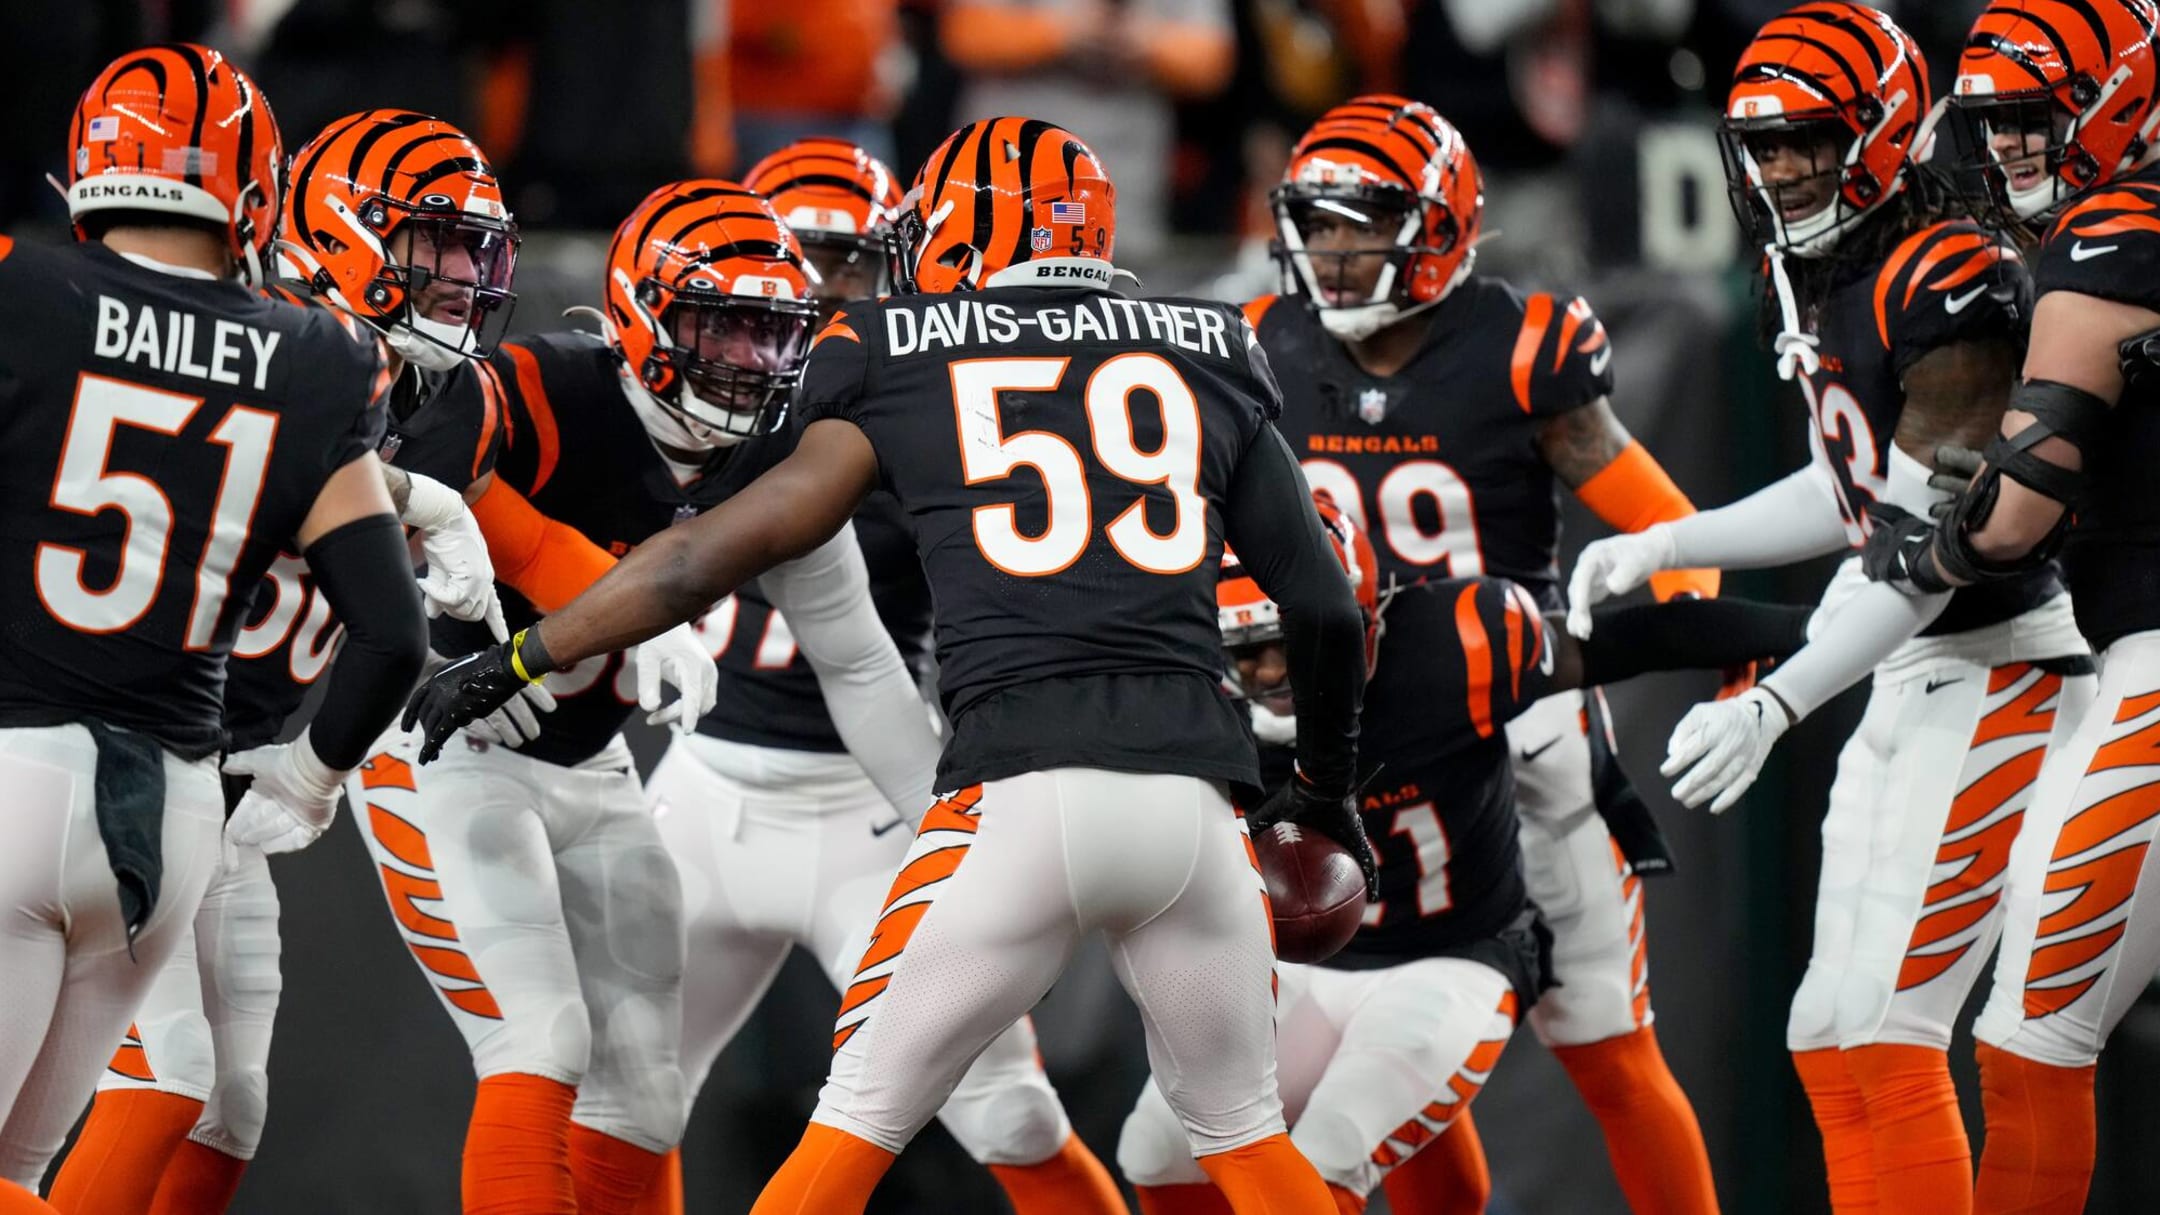 Hubbard's fumble return gives Bengals 24-17 win over Ravens